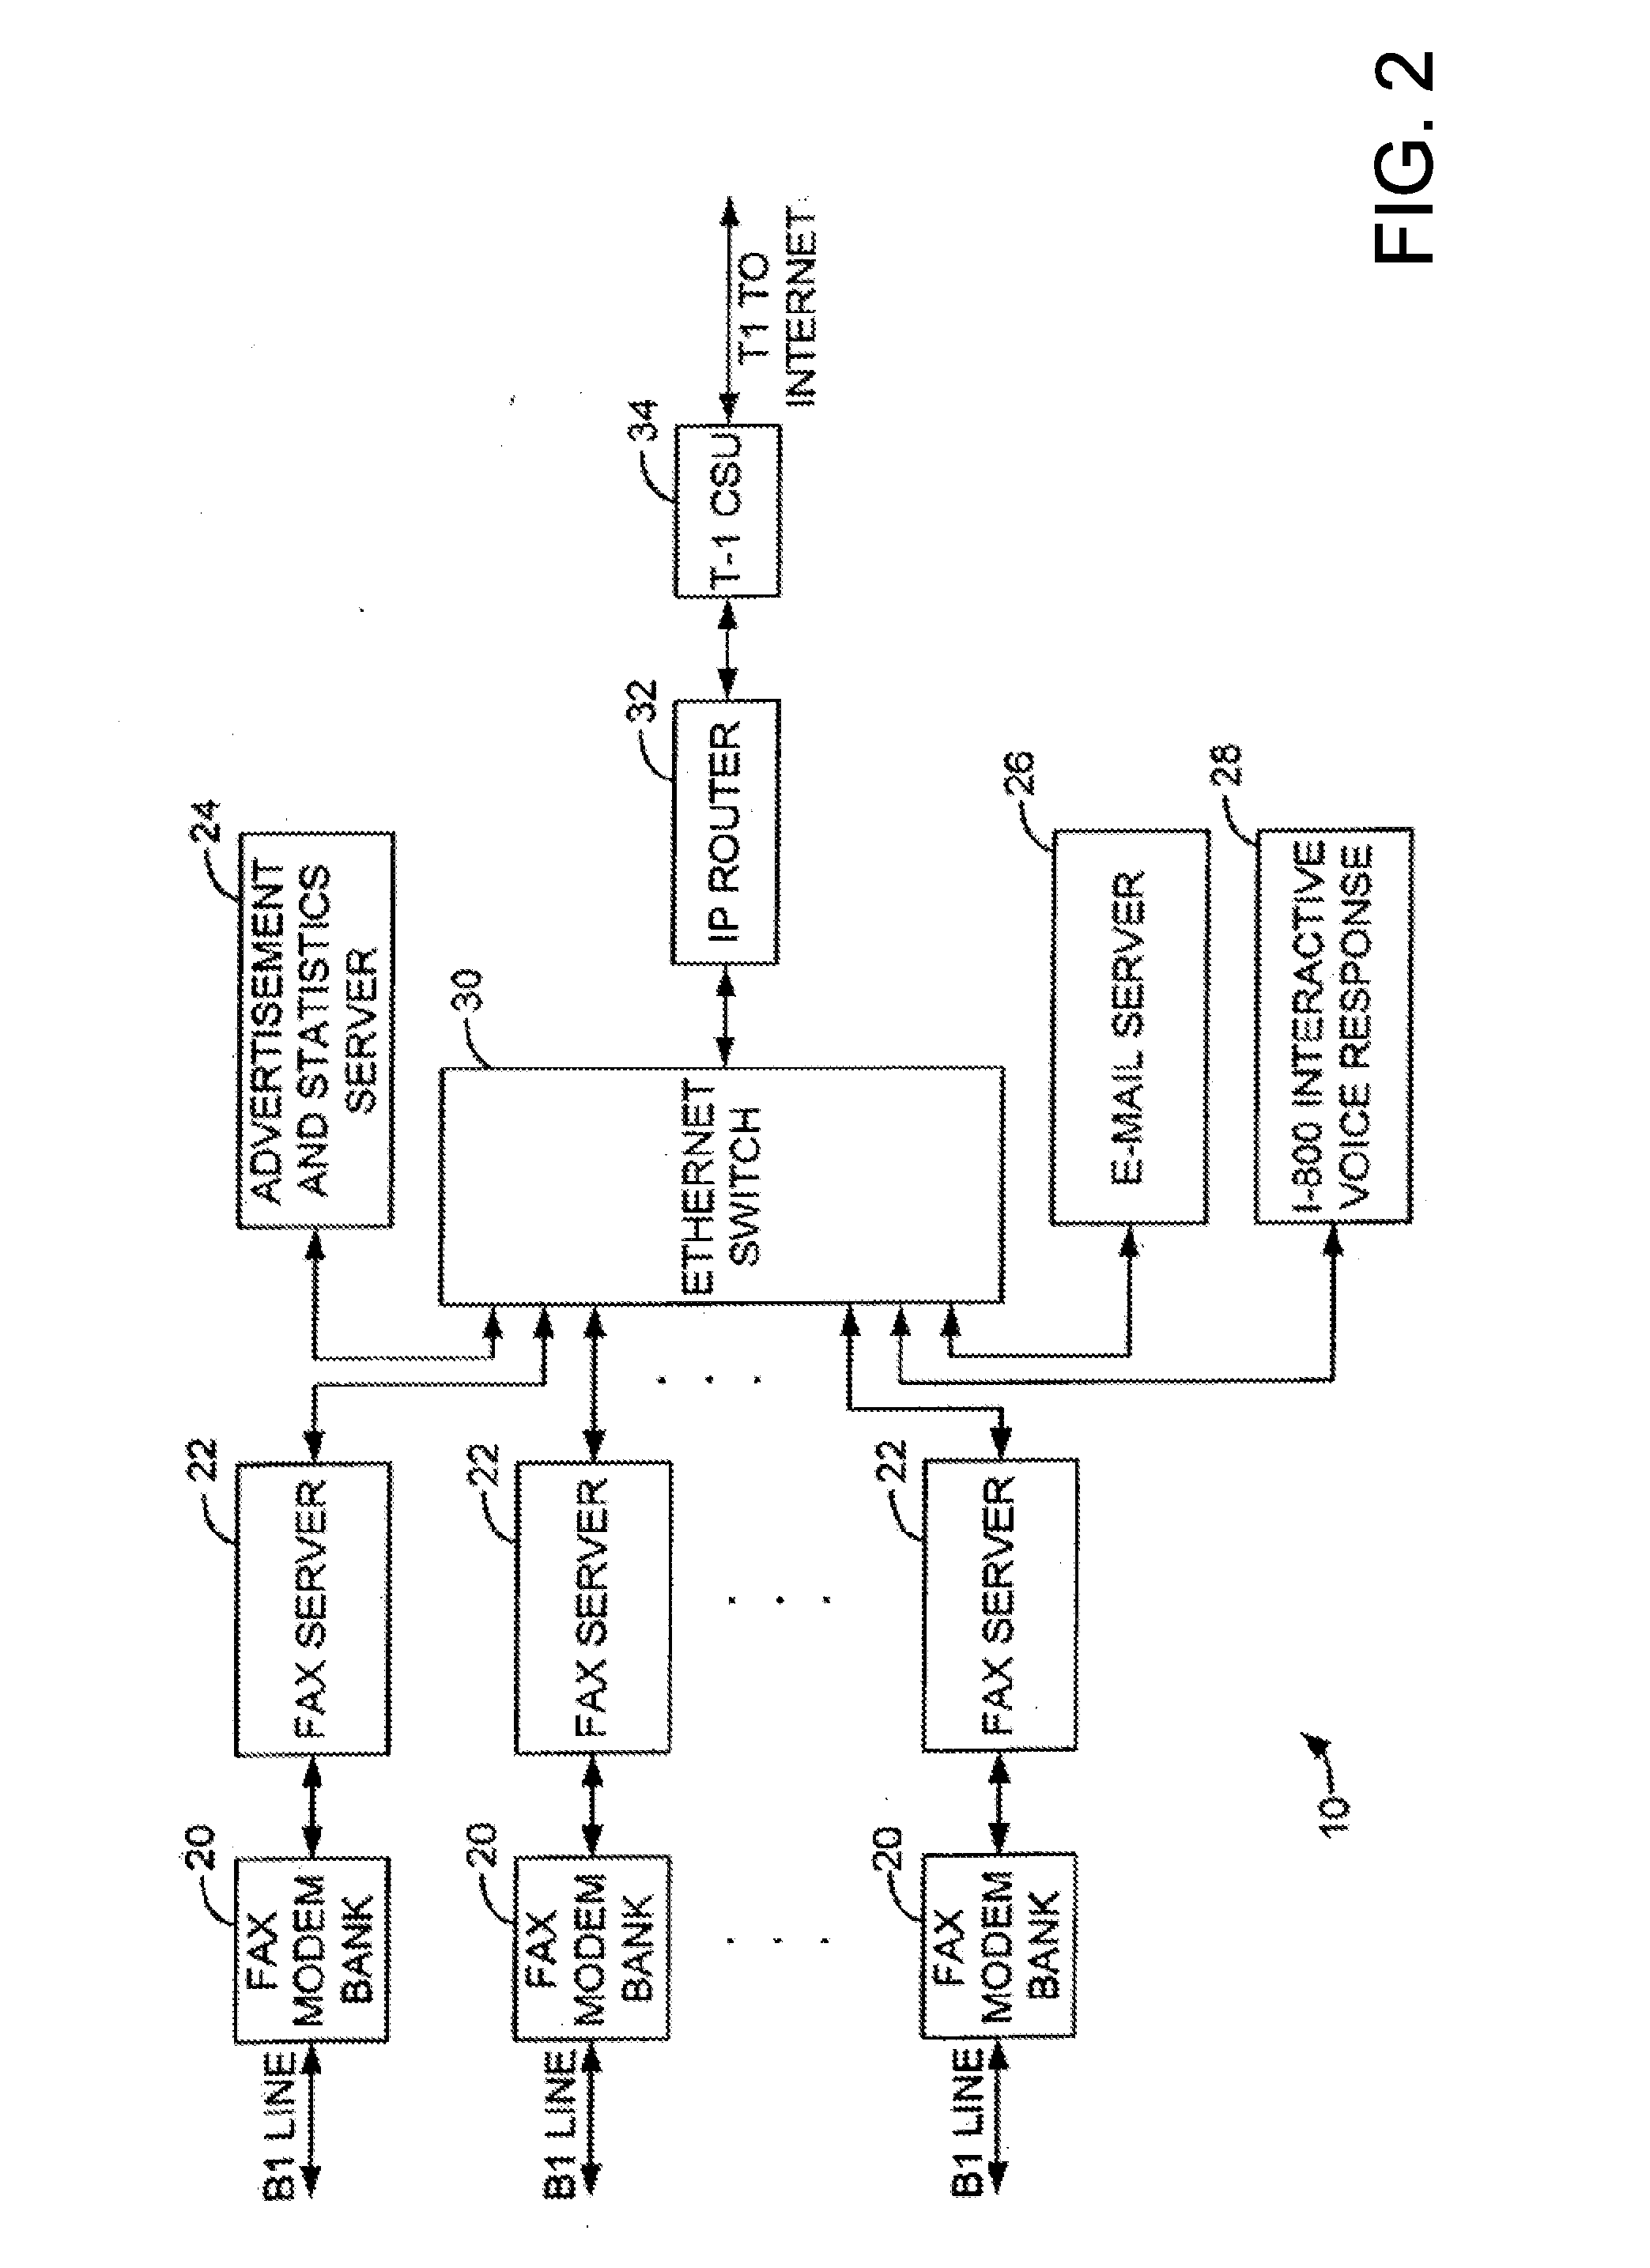 Methods and apparatus for secure facsimile transmissions to electronic storage destinations